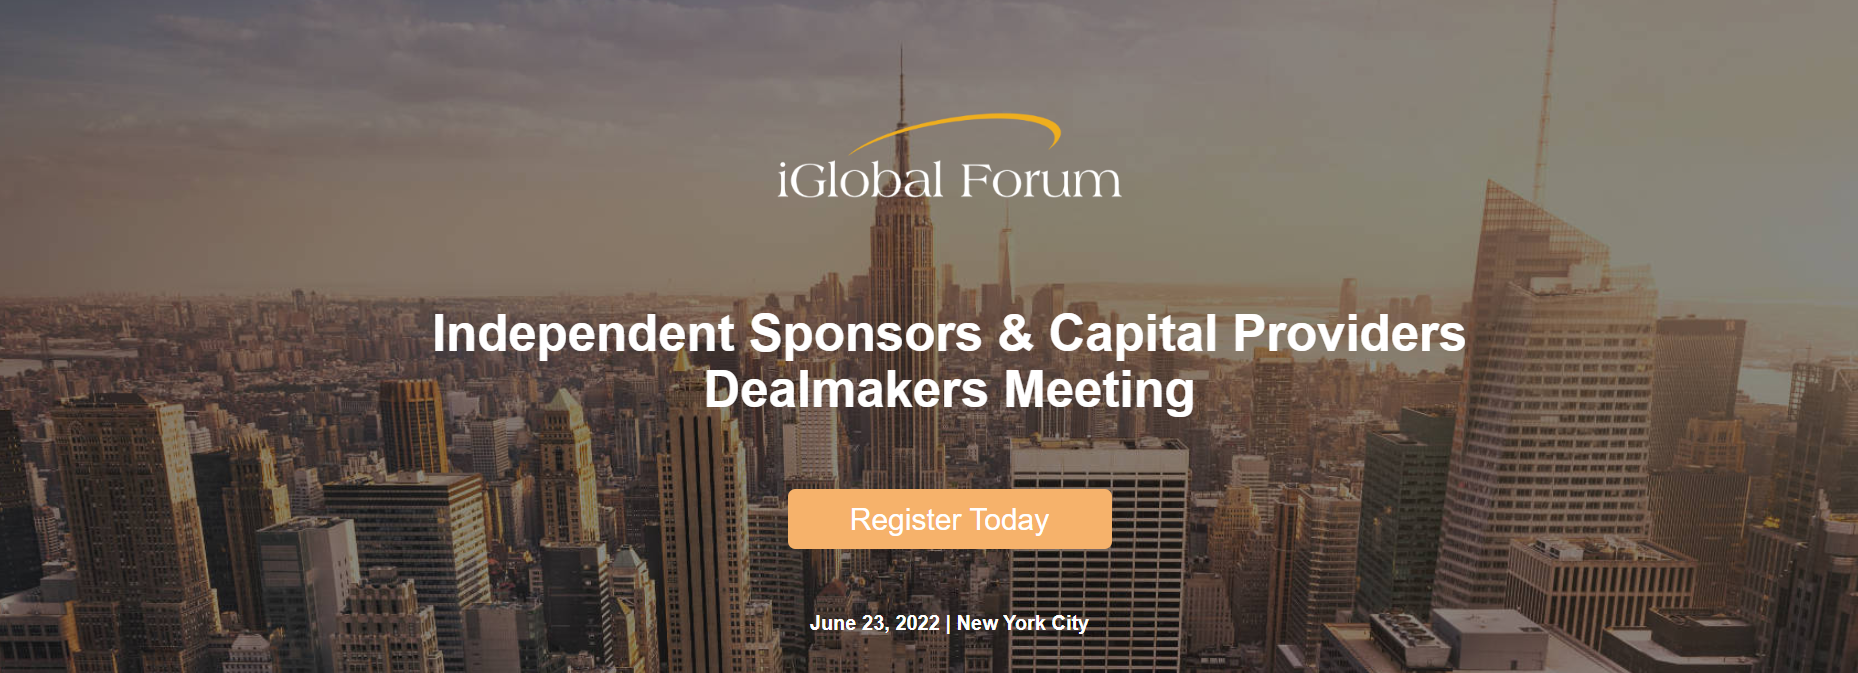 The Independent Sponsors & Capital Providers Dealmakers Meeting